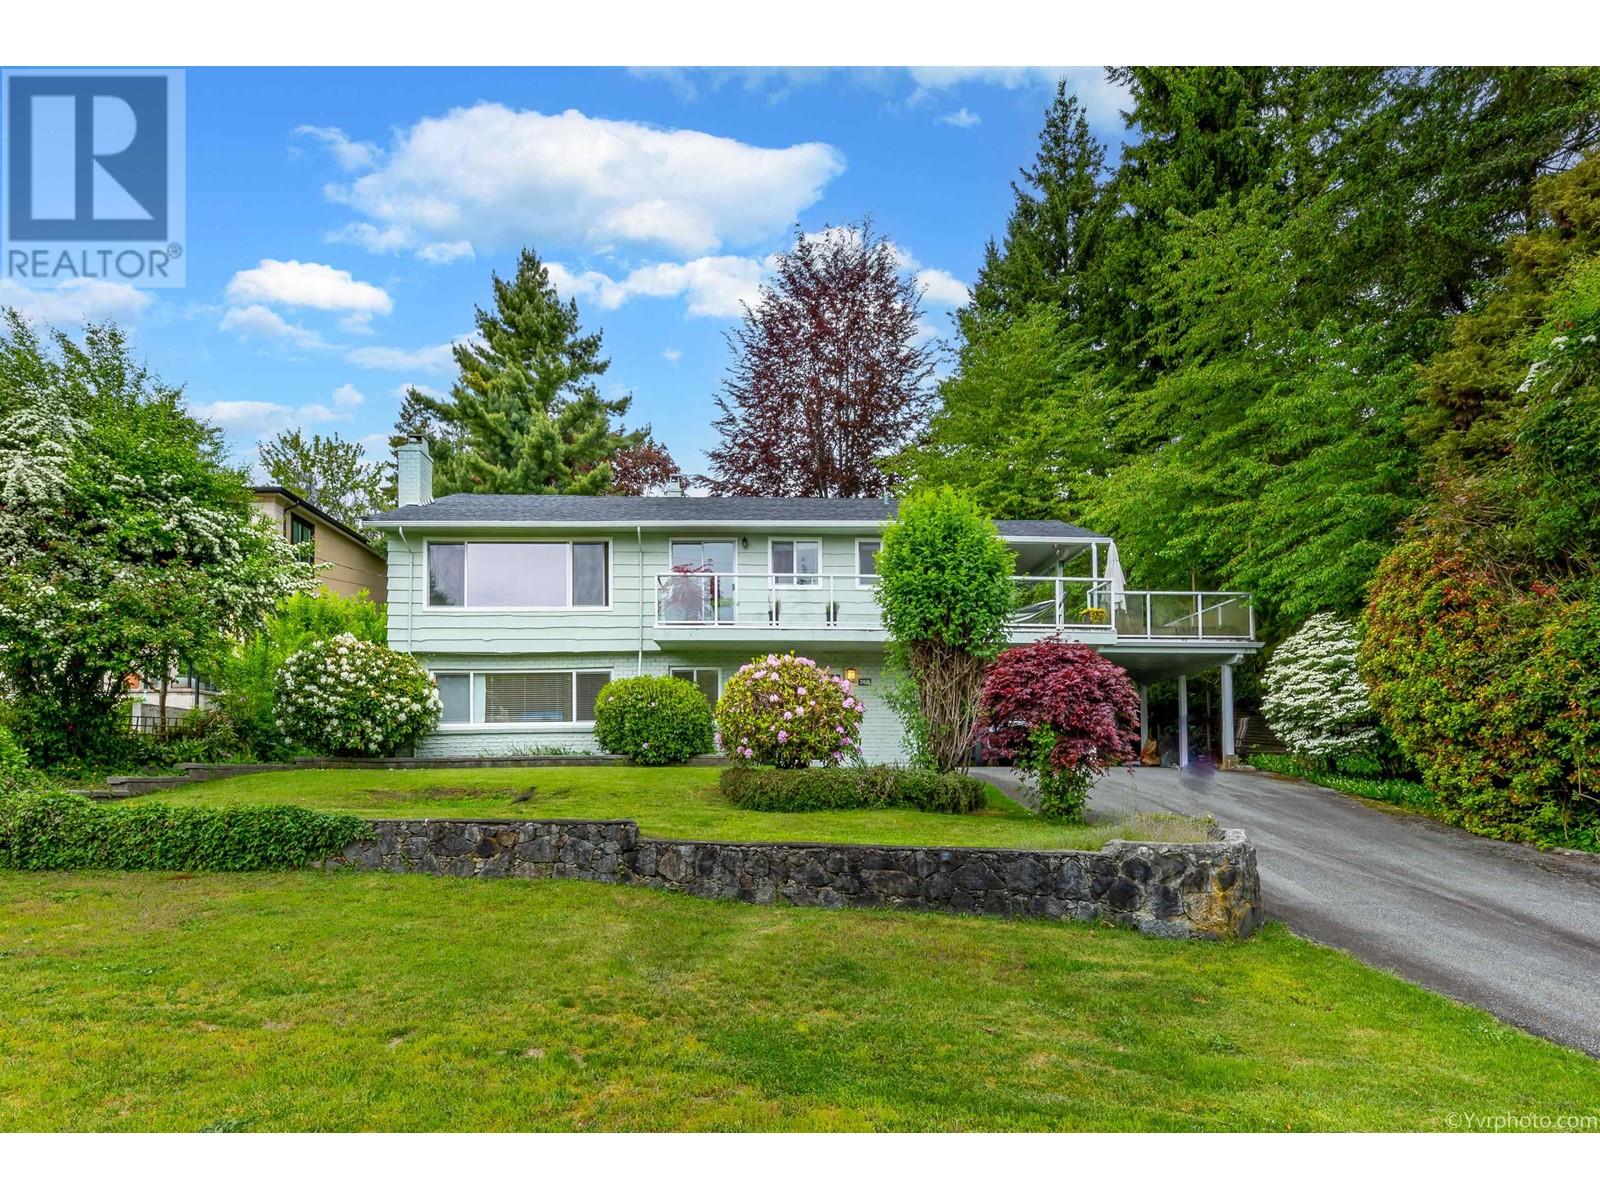 769 WESTCOT PLACE, west vancouver, British Columbia